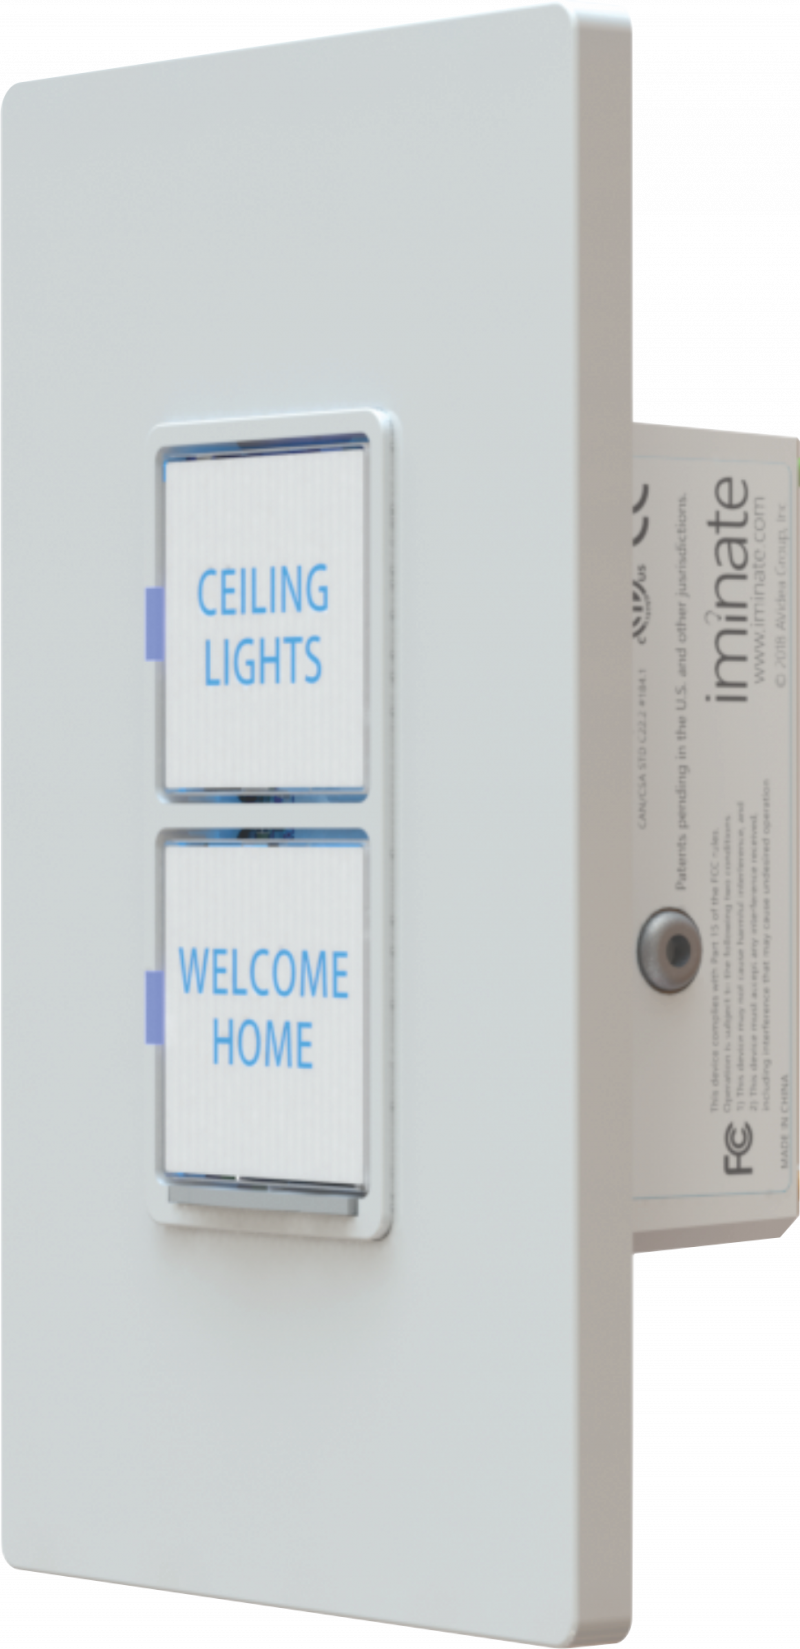 iminate Announces the Magic Box, the Plug-In and the Outlet for Simplified Control